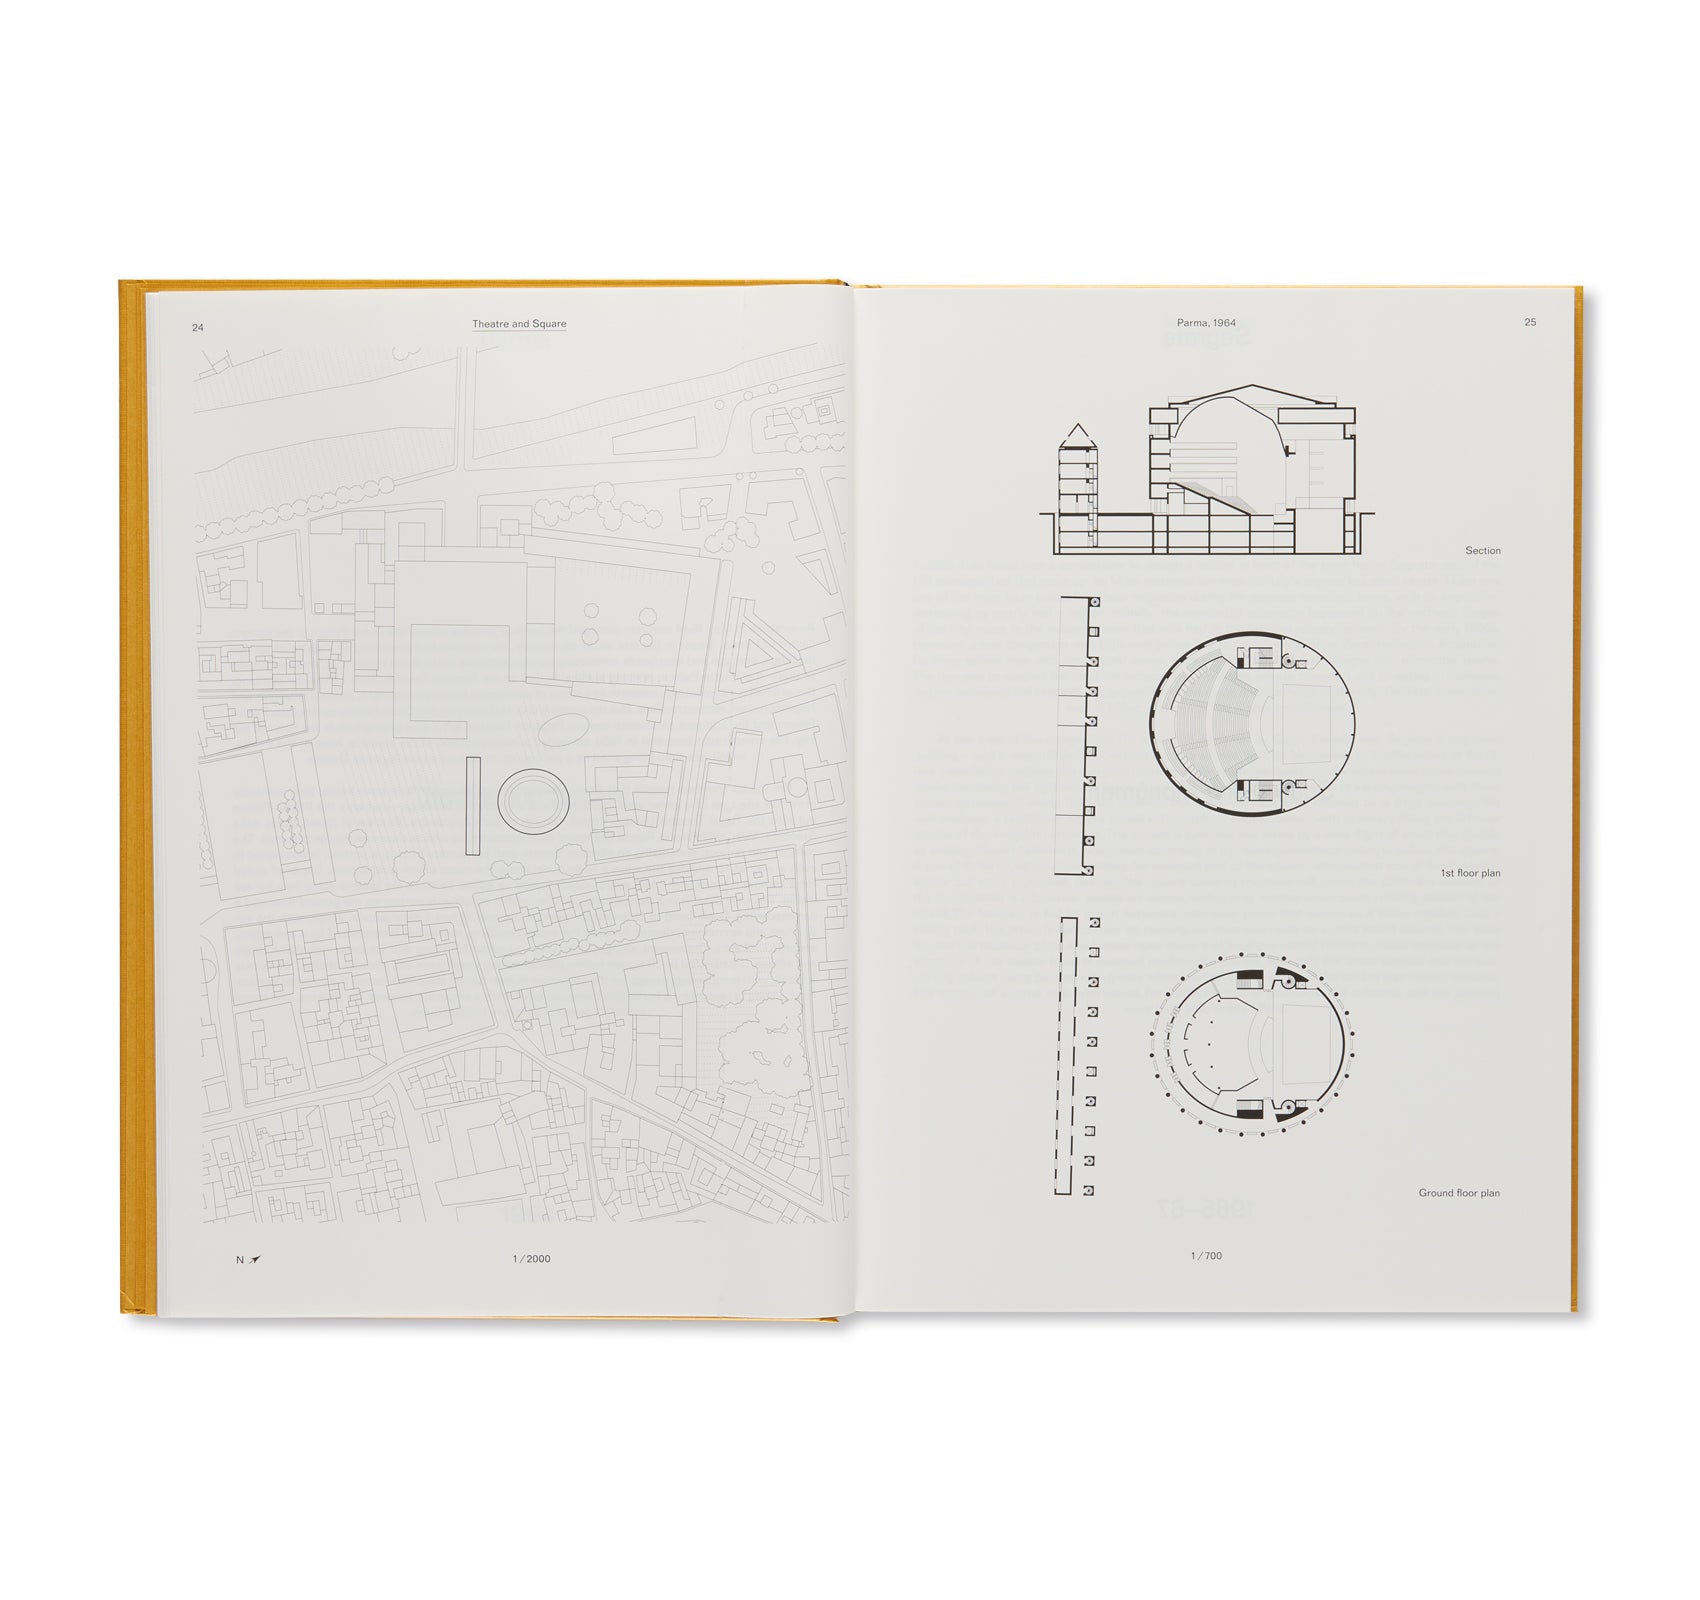 THE URBAN FACT. A REFERENCE BOOK ON ALDO ROSSI by Aldo Rossi